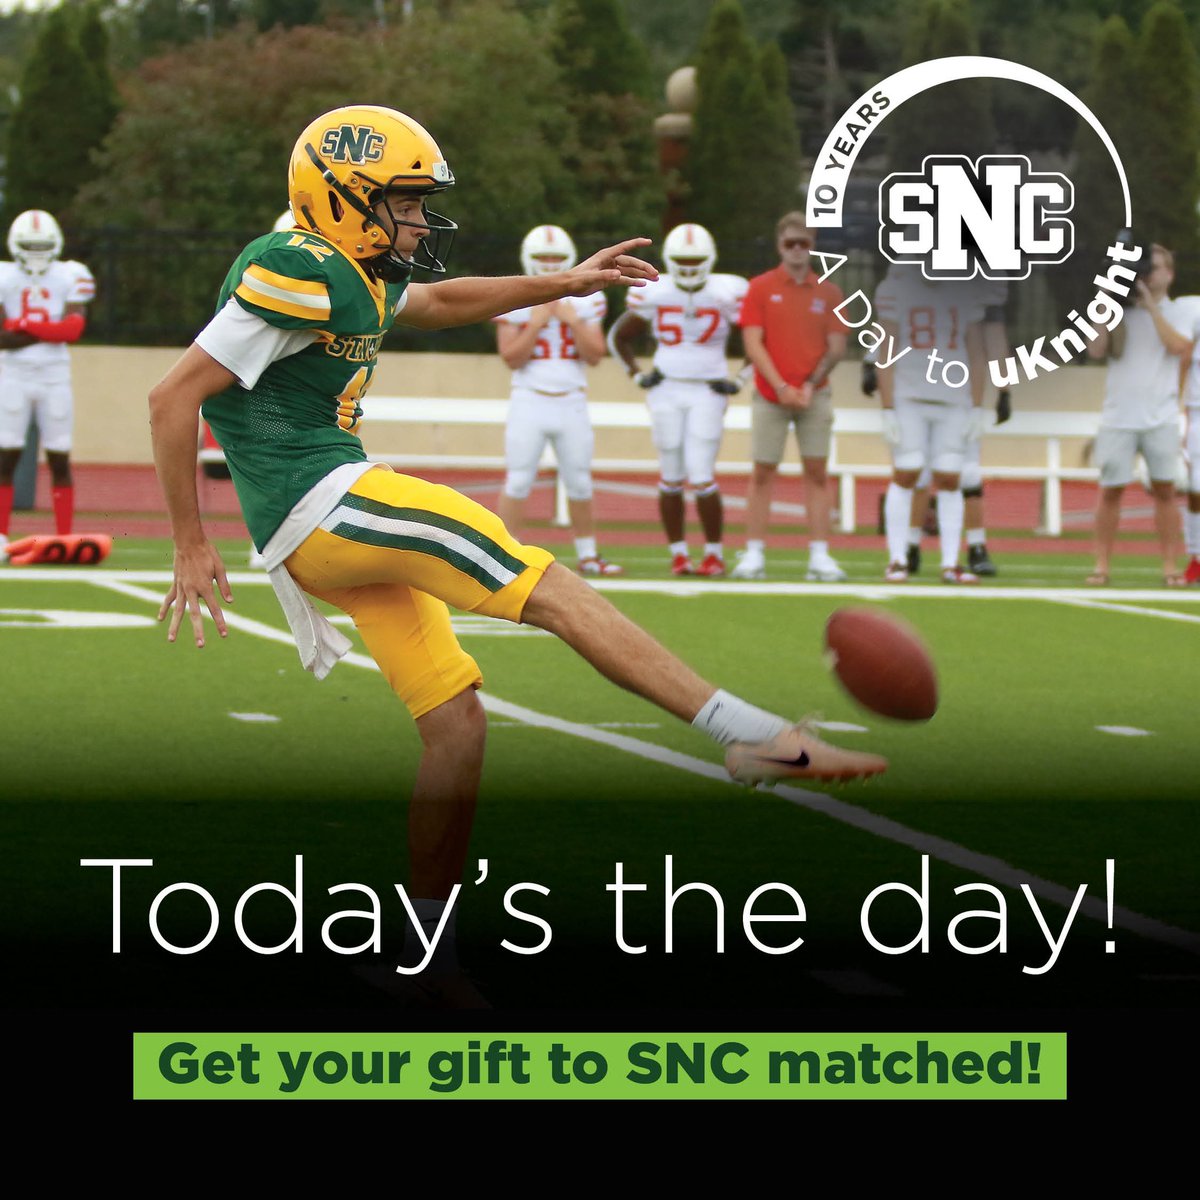 Let’s win big today! Today is the annual day of giving for the St. Norbert Fund, an important source of student financial aid. Every gift will be matched dollar-for-dollar. Join the team and make today a “W” for SNC students! Visit daytouknight.snc.edu/pages/giving-d… #GoGreenKnights